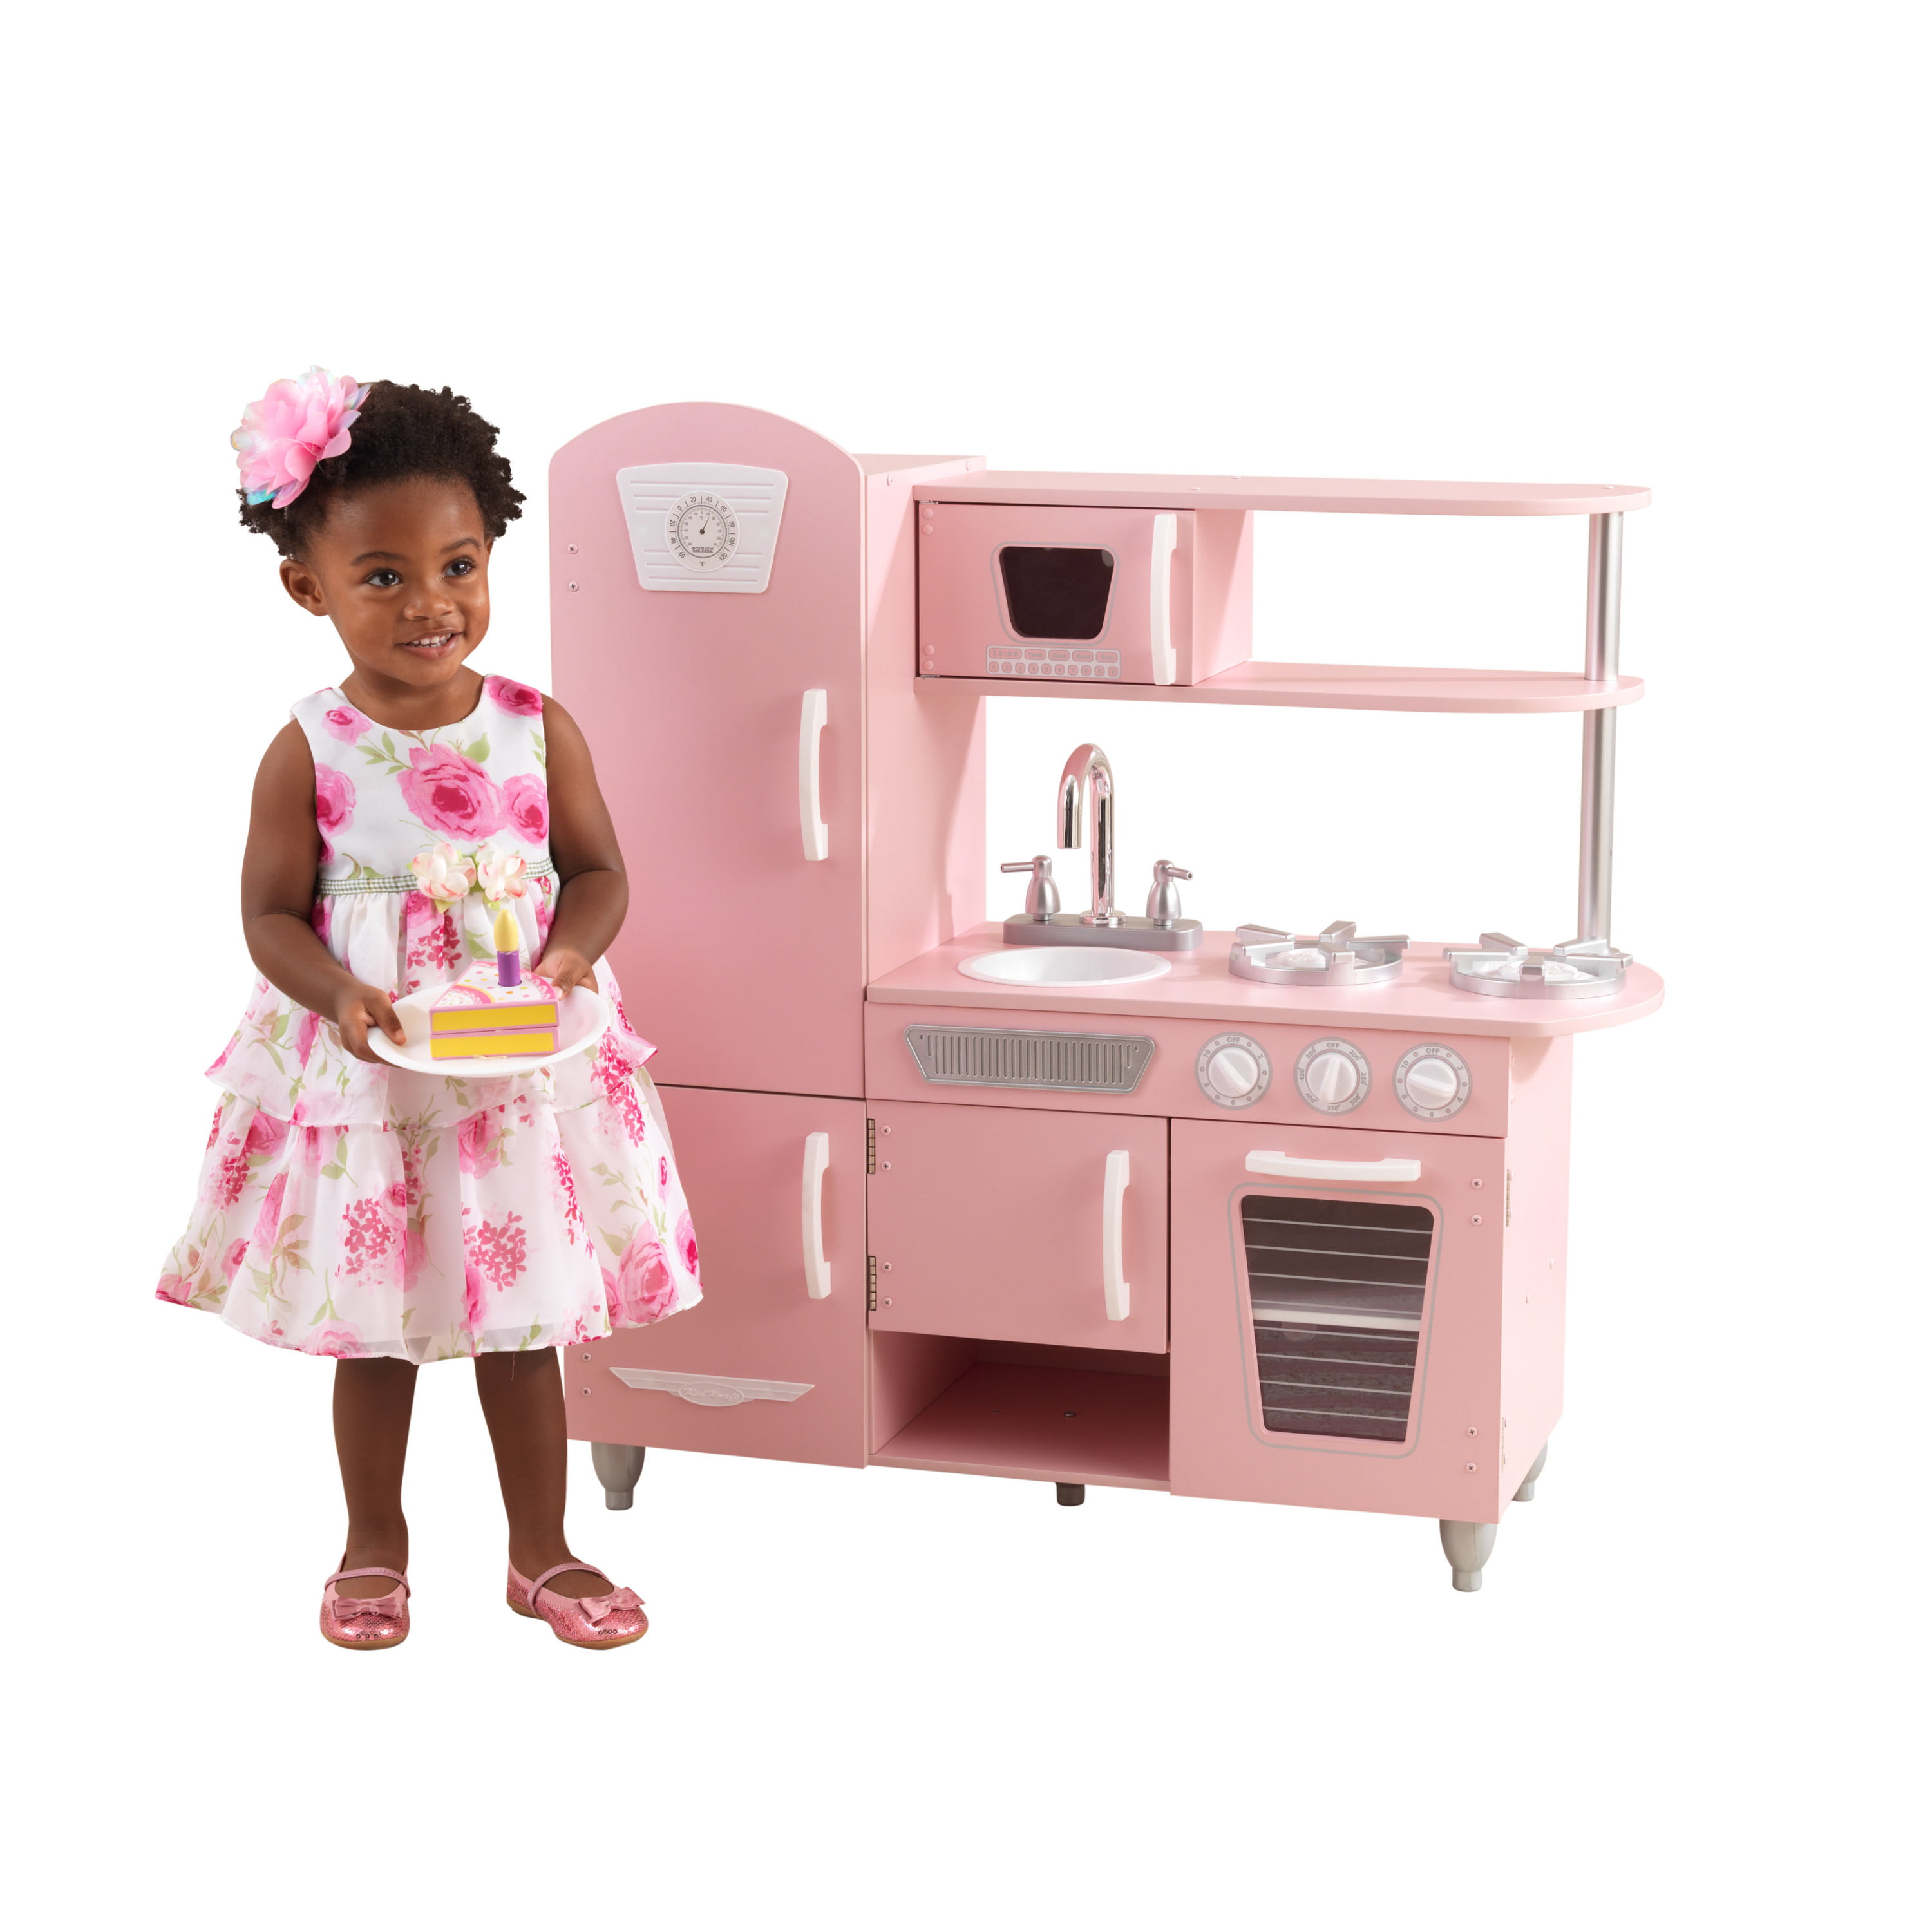 Kitchen Toy Play Set For Girls Children Kids Deluxe Big and Bright Pink Cooking 